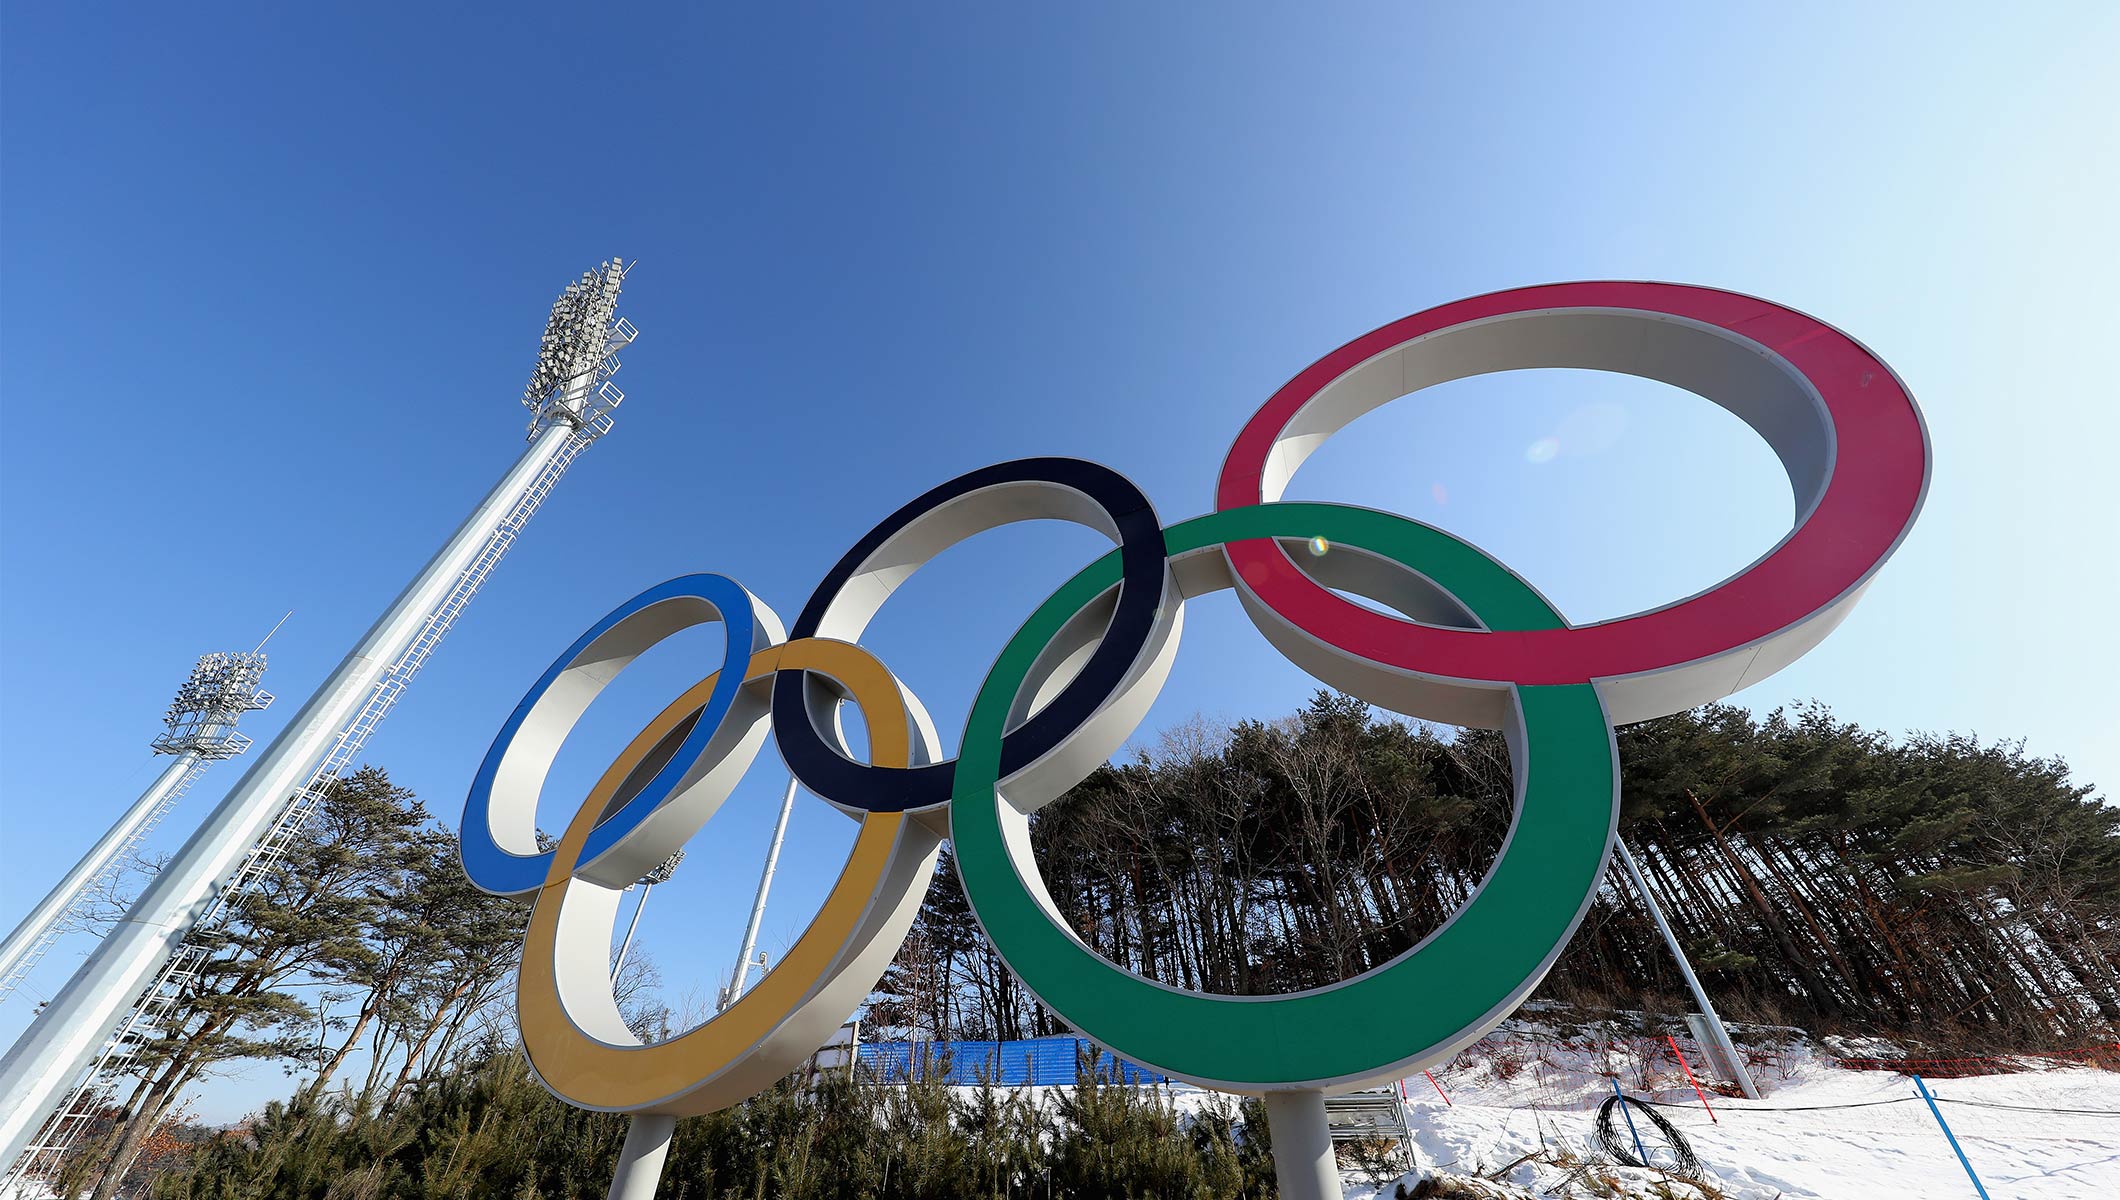 Independent research conducted on behalf of the IOC demonstrates global